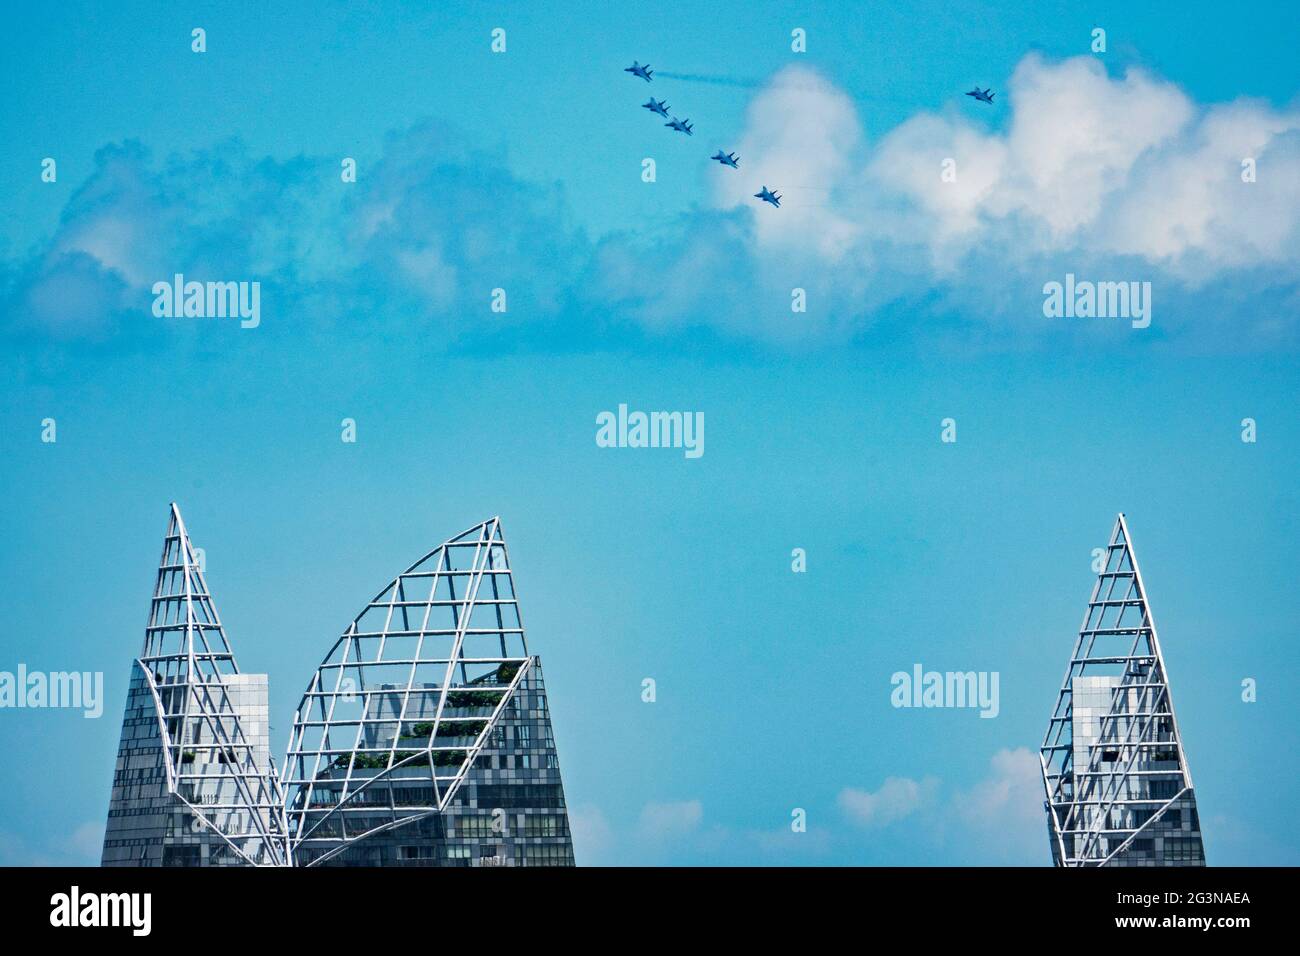 Singapore. 17th June, 2021. Aircrafts fly in formation as part of the rehearsal for the upcoming National Day Parade flying display in Singapore on June 17, 2021. Singapore celebrates its independence day every year on Aug. 9. Credit: Then Chih Wey/Xinhua/Alamy Live News Stock Photo